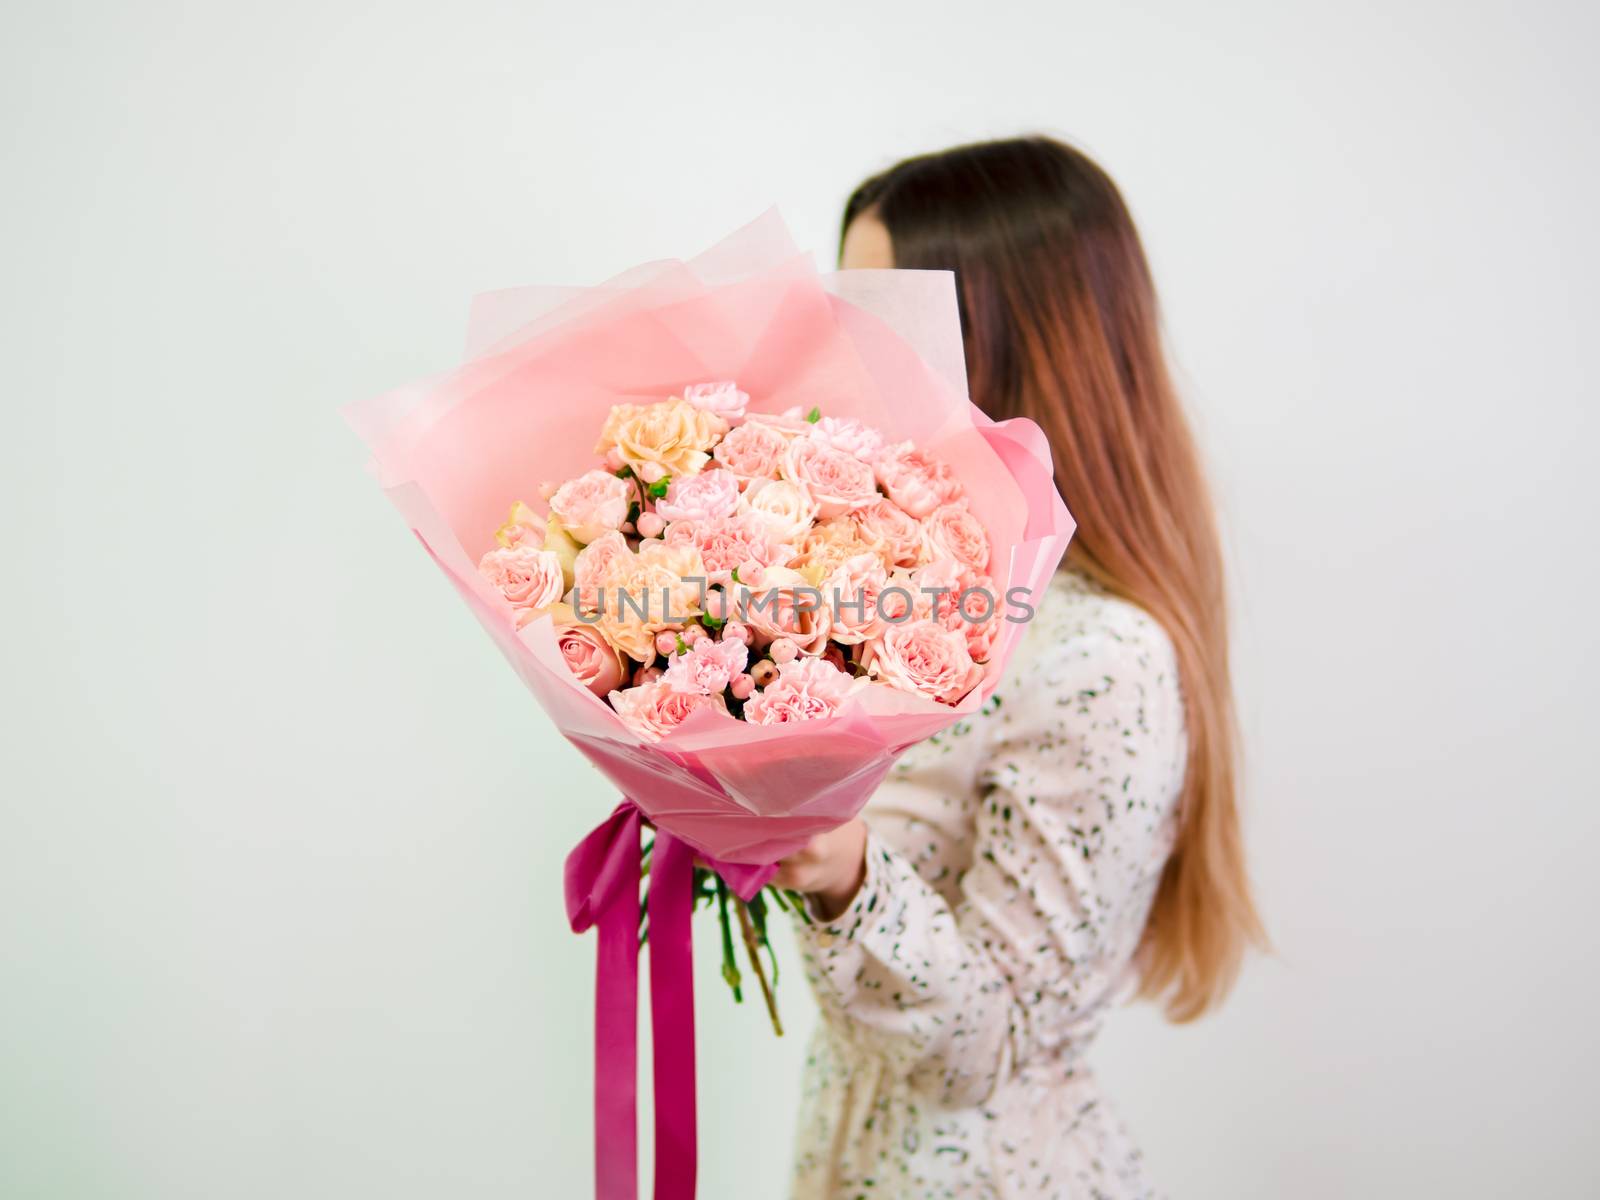 Beautiful bouquet with different pink flowers in woman hands. Nice subtle delicate pink bouquet with roses, dianthus, hypericum, clove. Shallow DOF. Copy space for text.